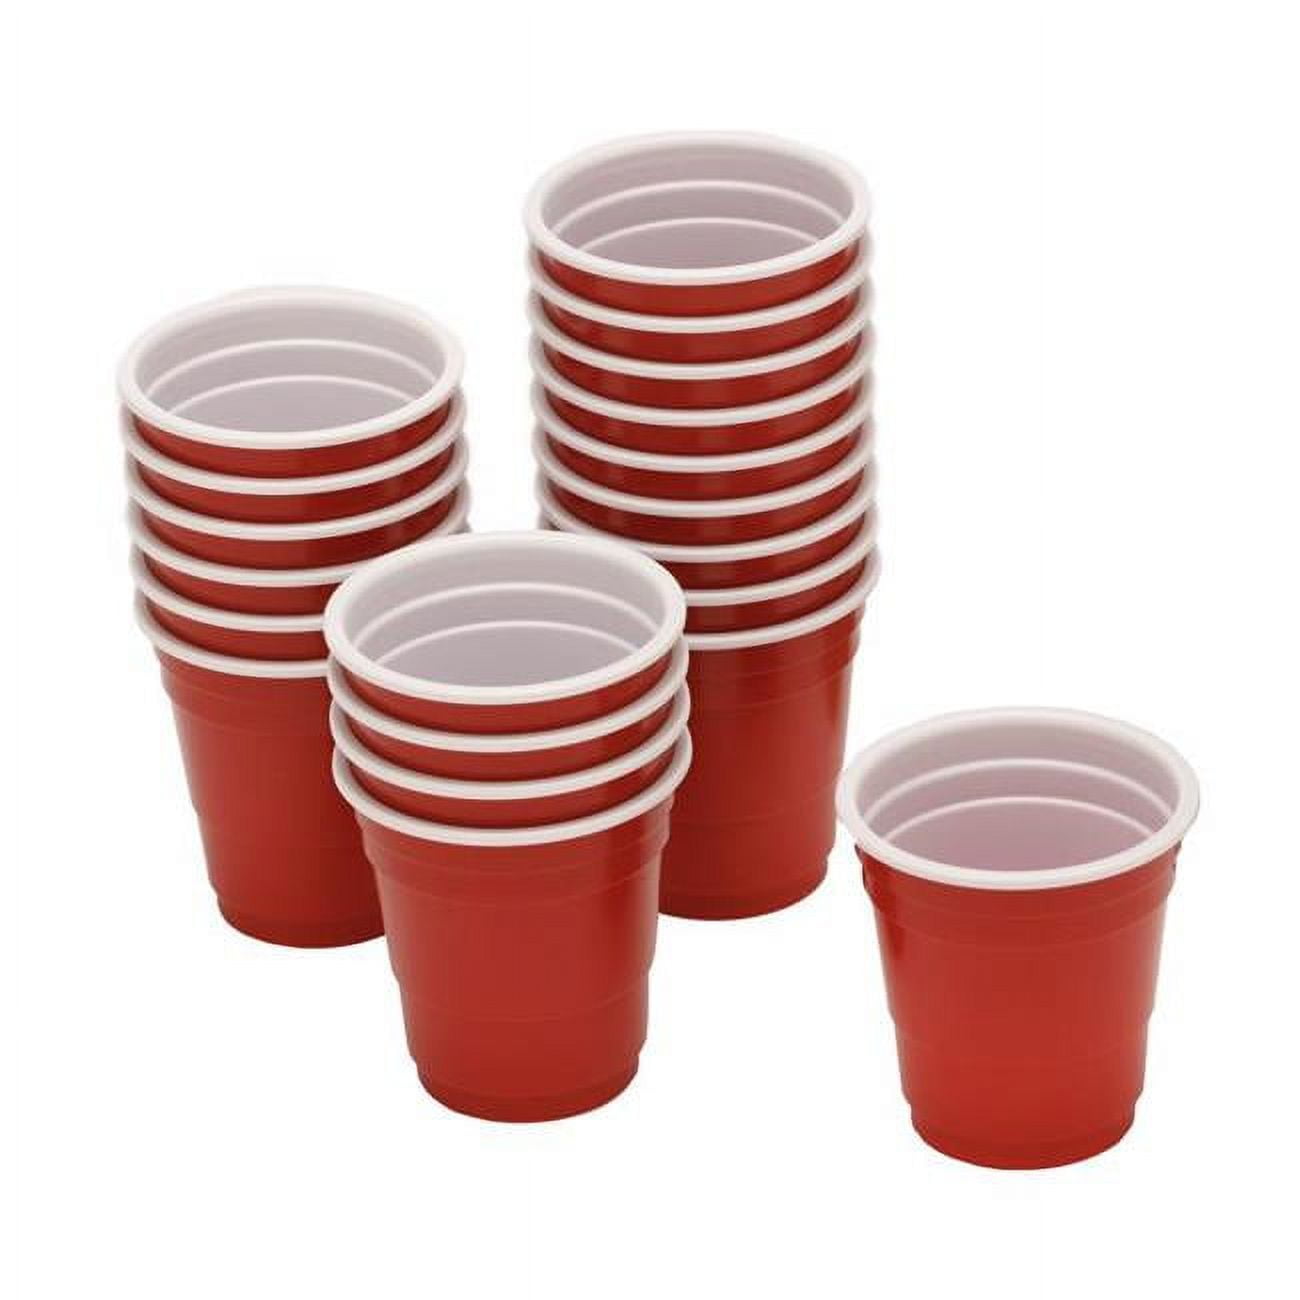 Picture of Bary3 6025901 2 oz Polypropylene Disposable Shot Glass - Red & White